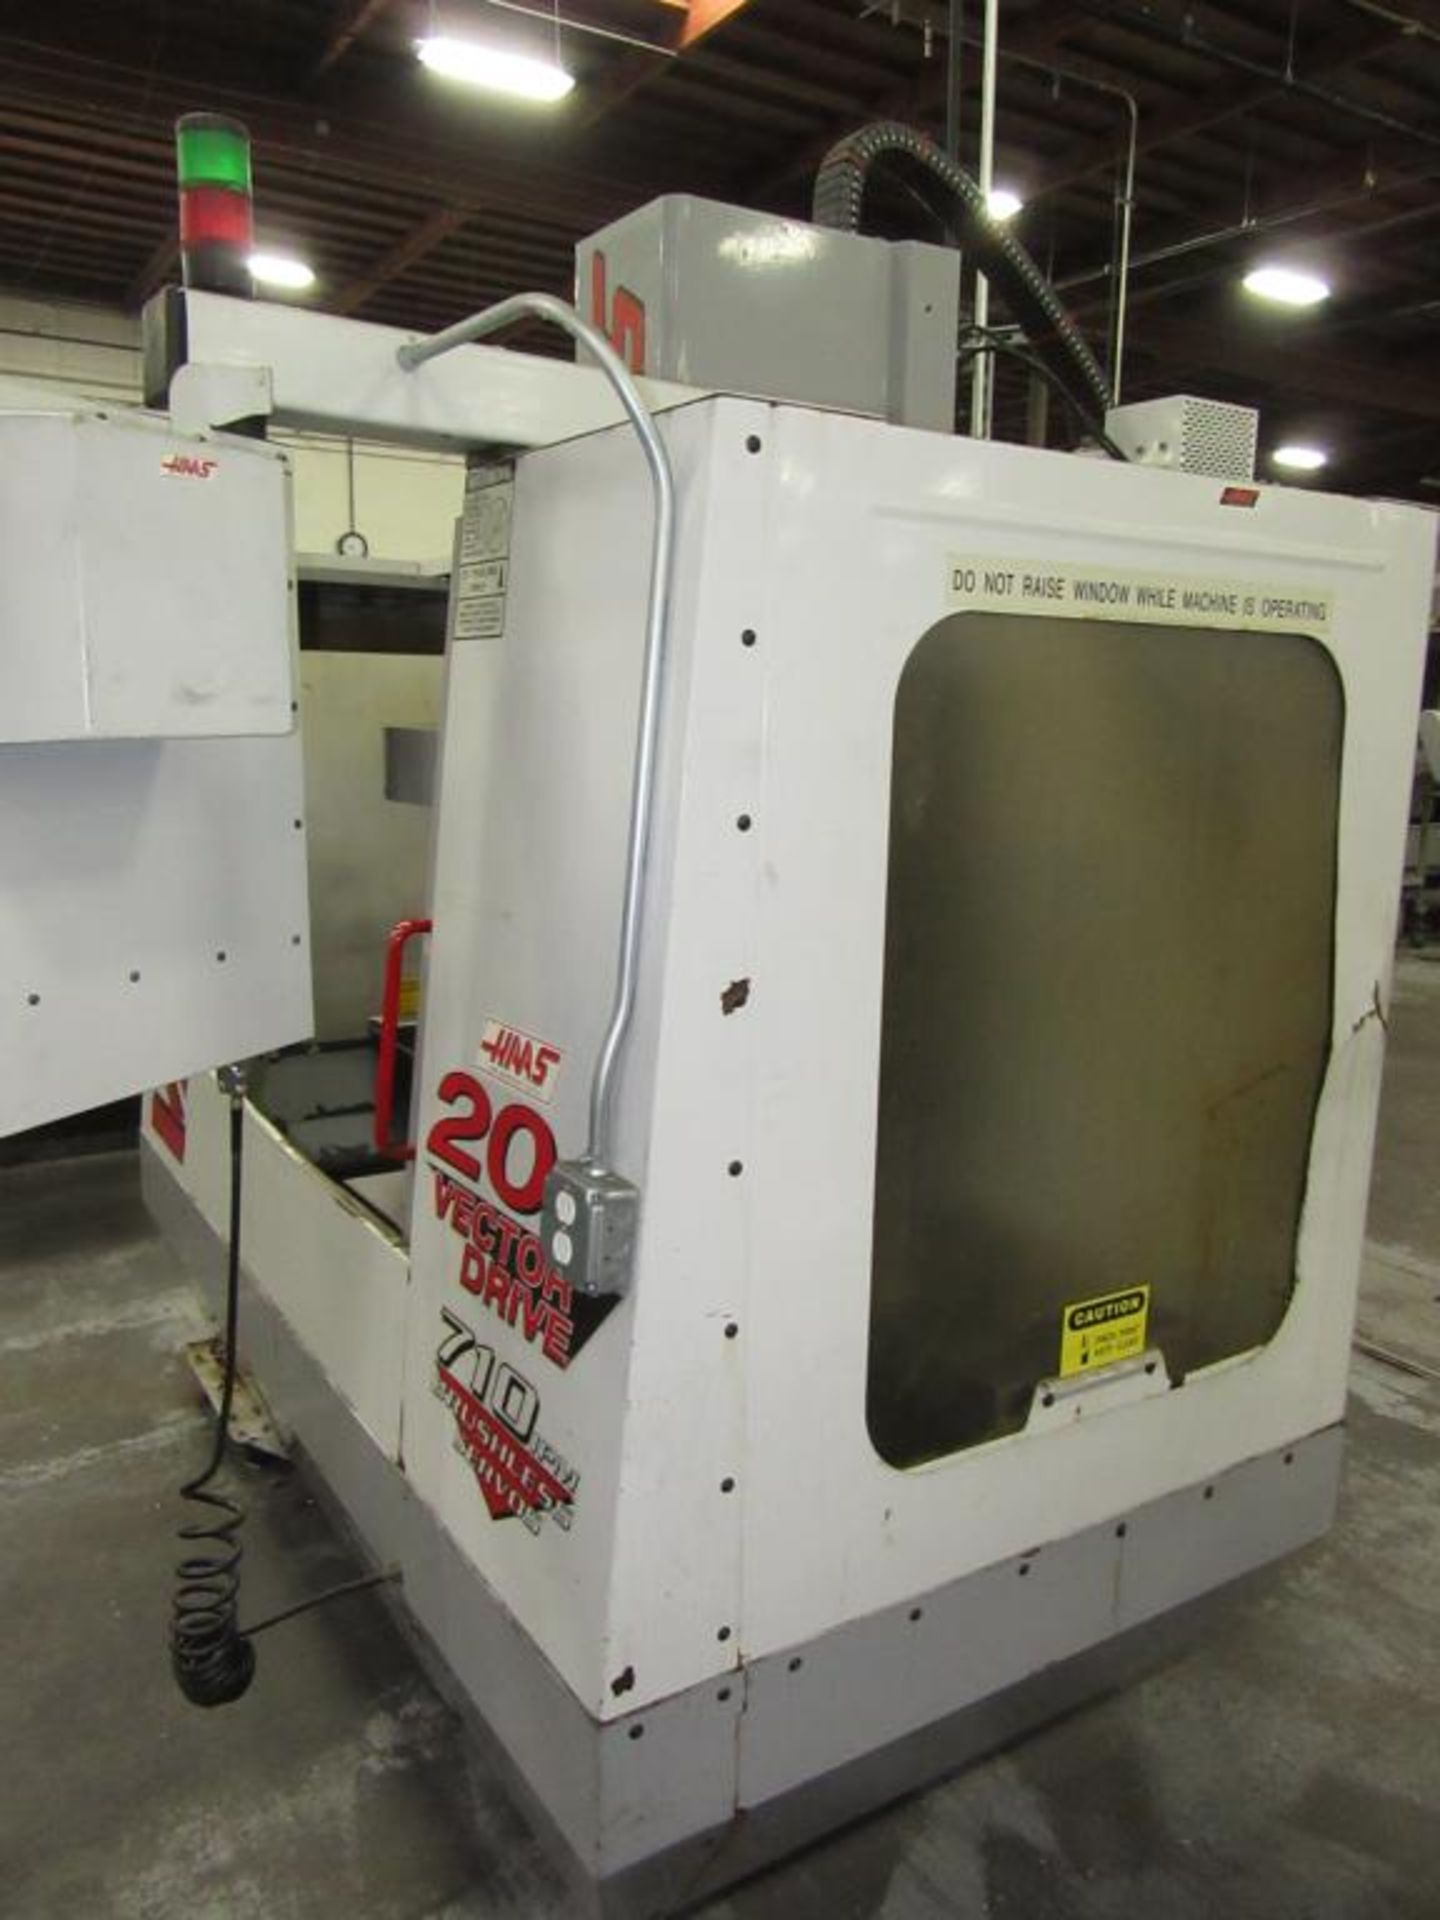 Haas VF-OE. 1997 - CNC Vertical Machining Center with Haas 3-Axis Control Panel, Table Size 36"L x - Image 9 of 12